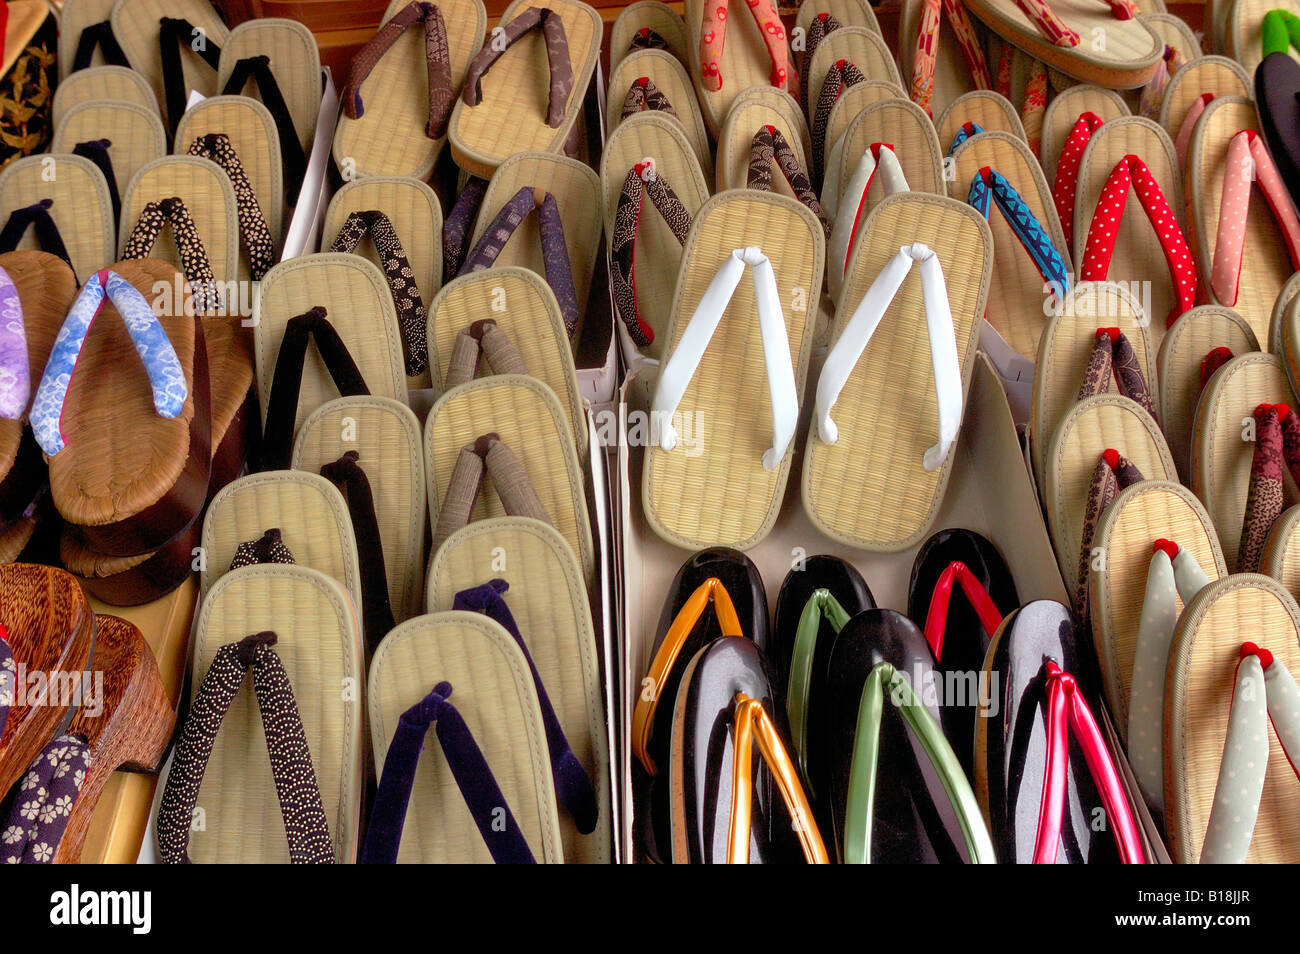 japanese sandals for sale Kyoto Japan Stock Photo